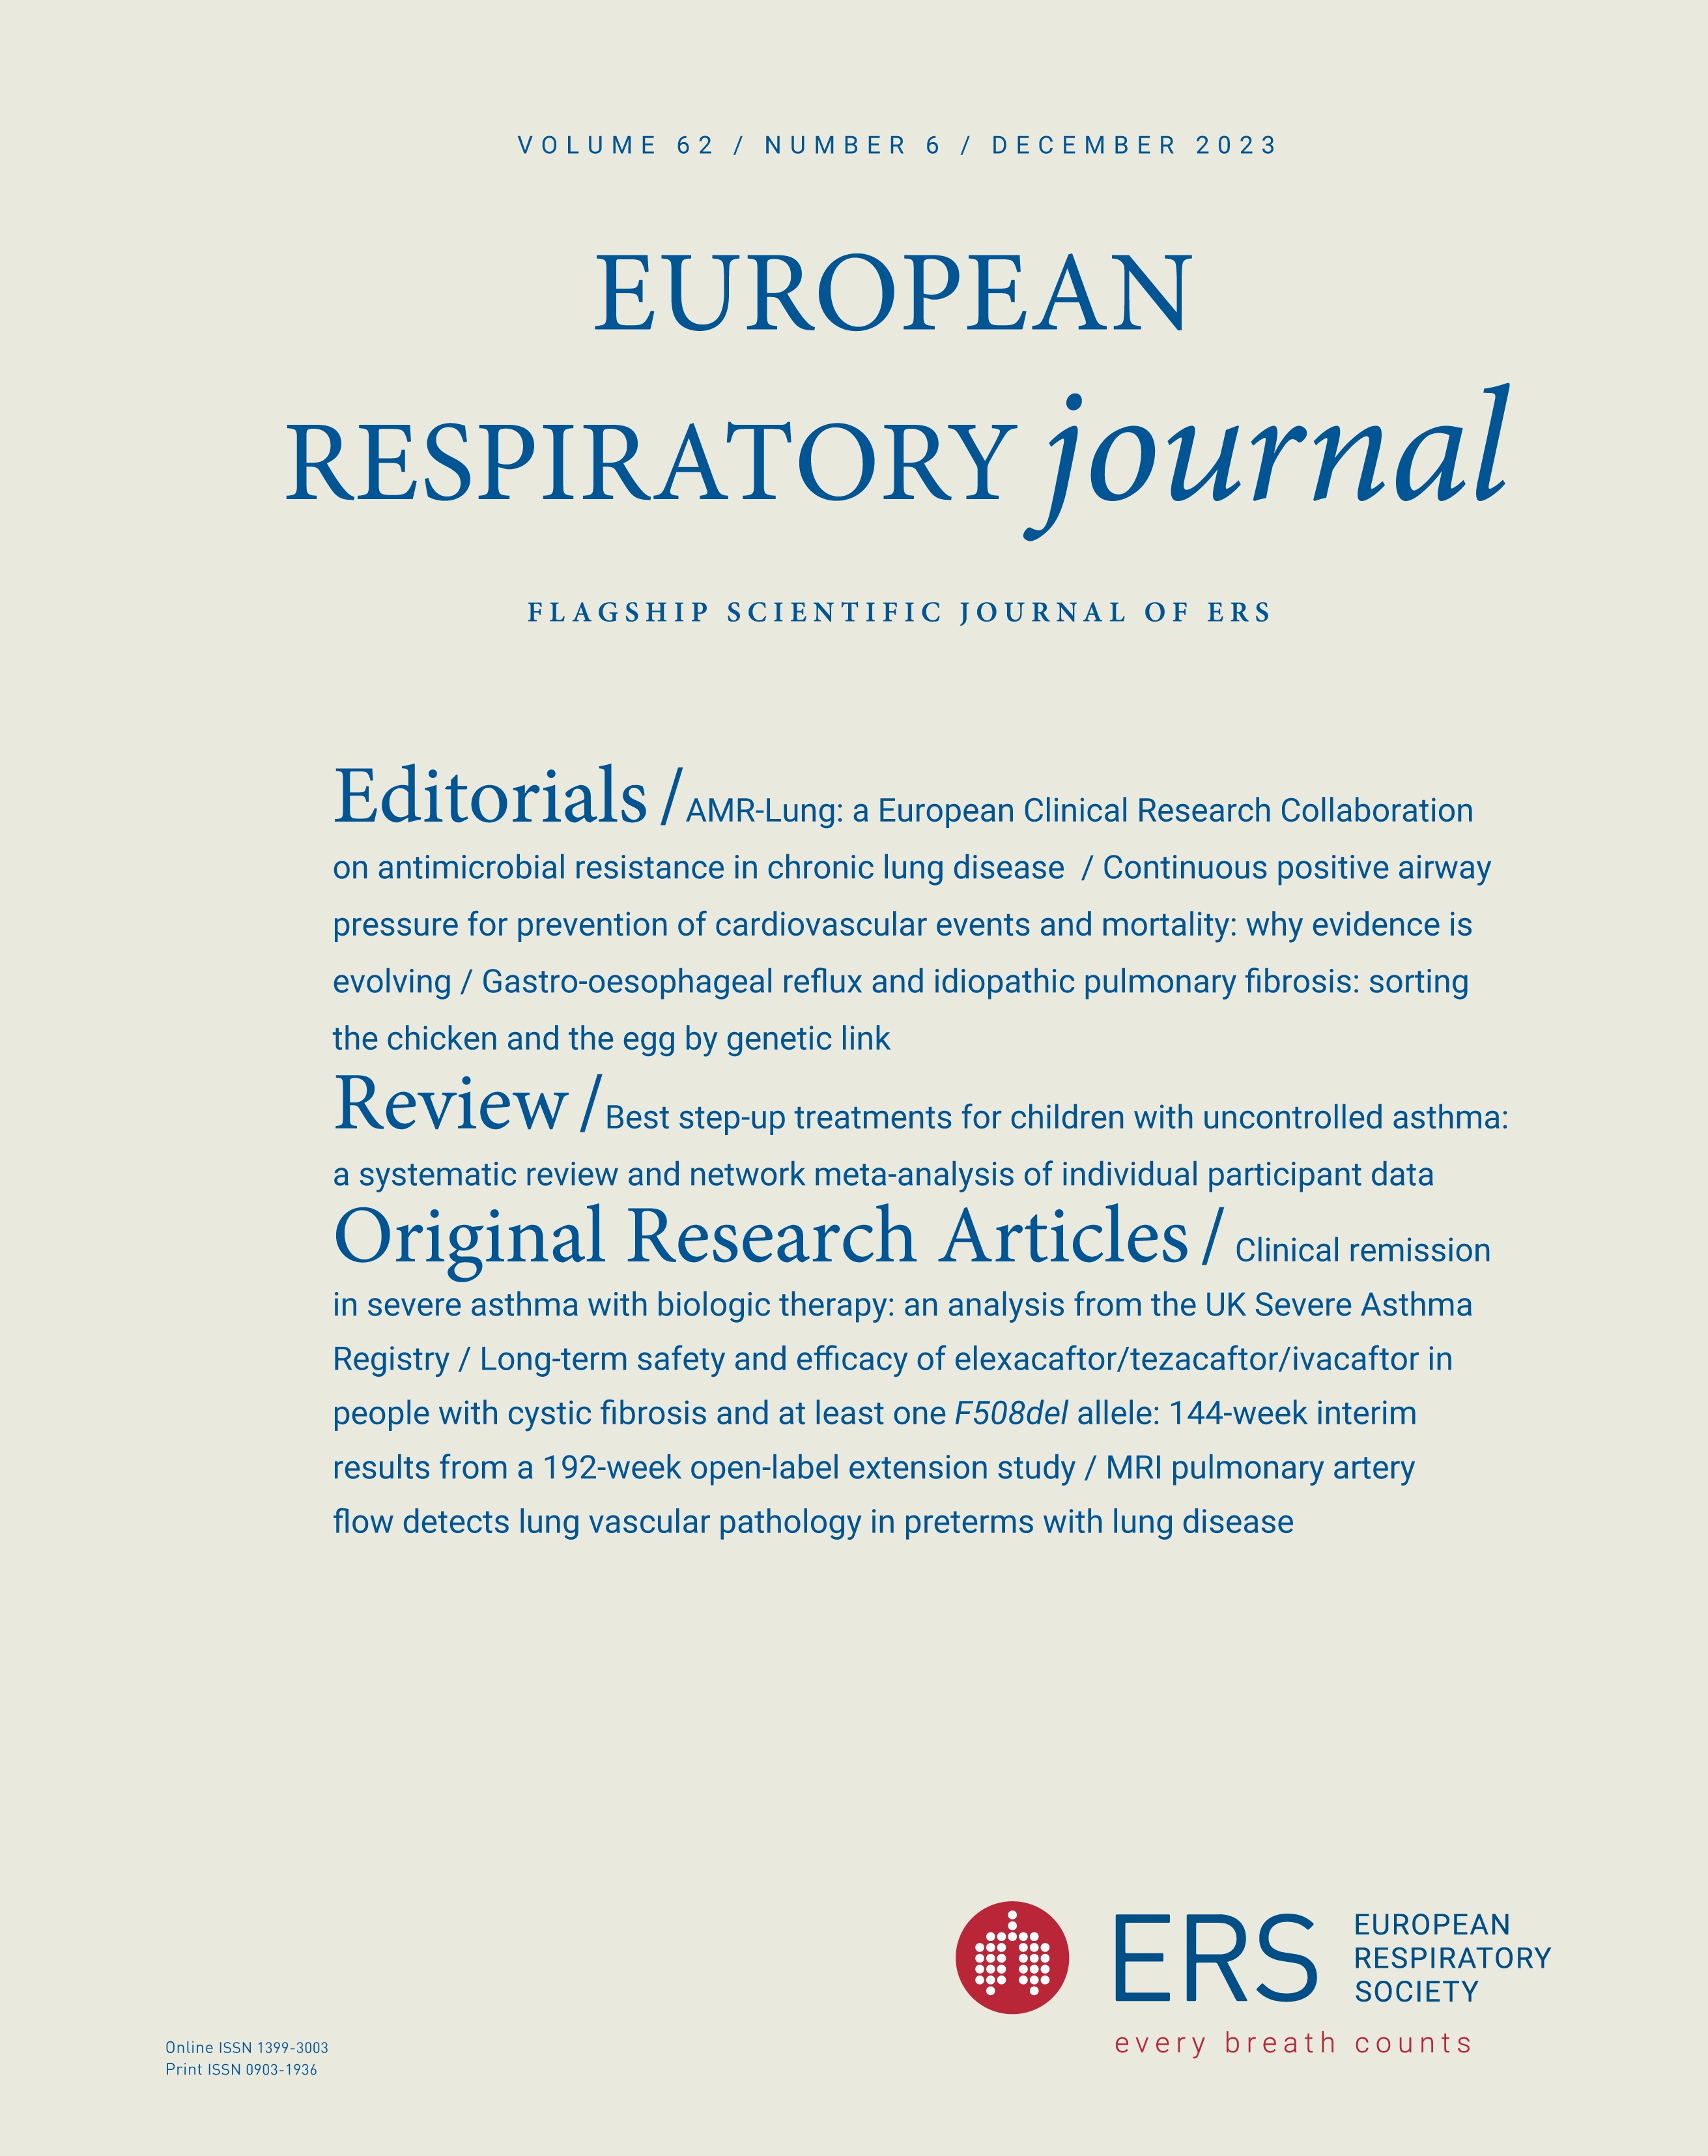 Indwelling pleural catheters or chest drains for managing malignant pleural effusions: a distinction without a difference?